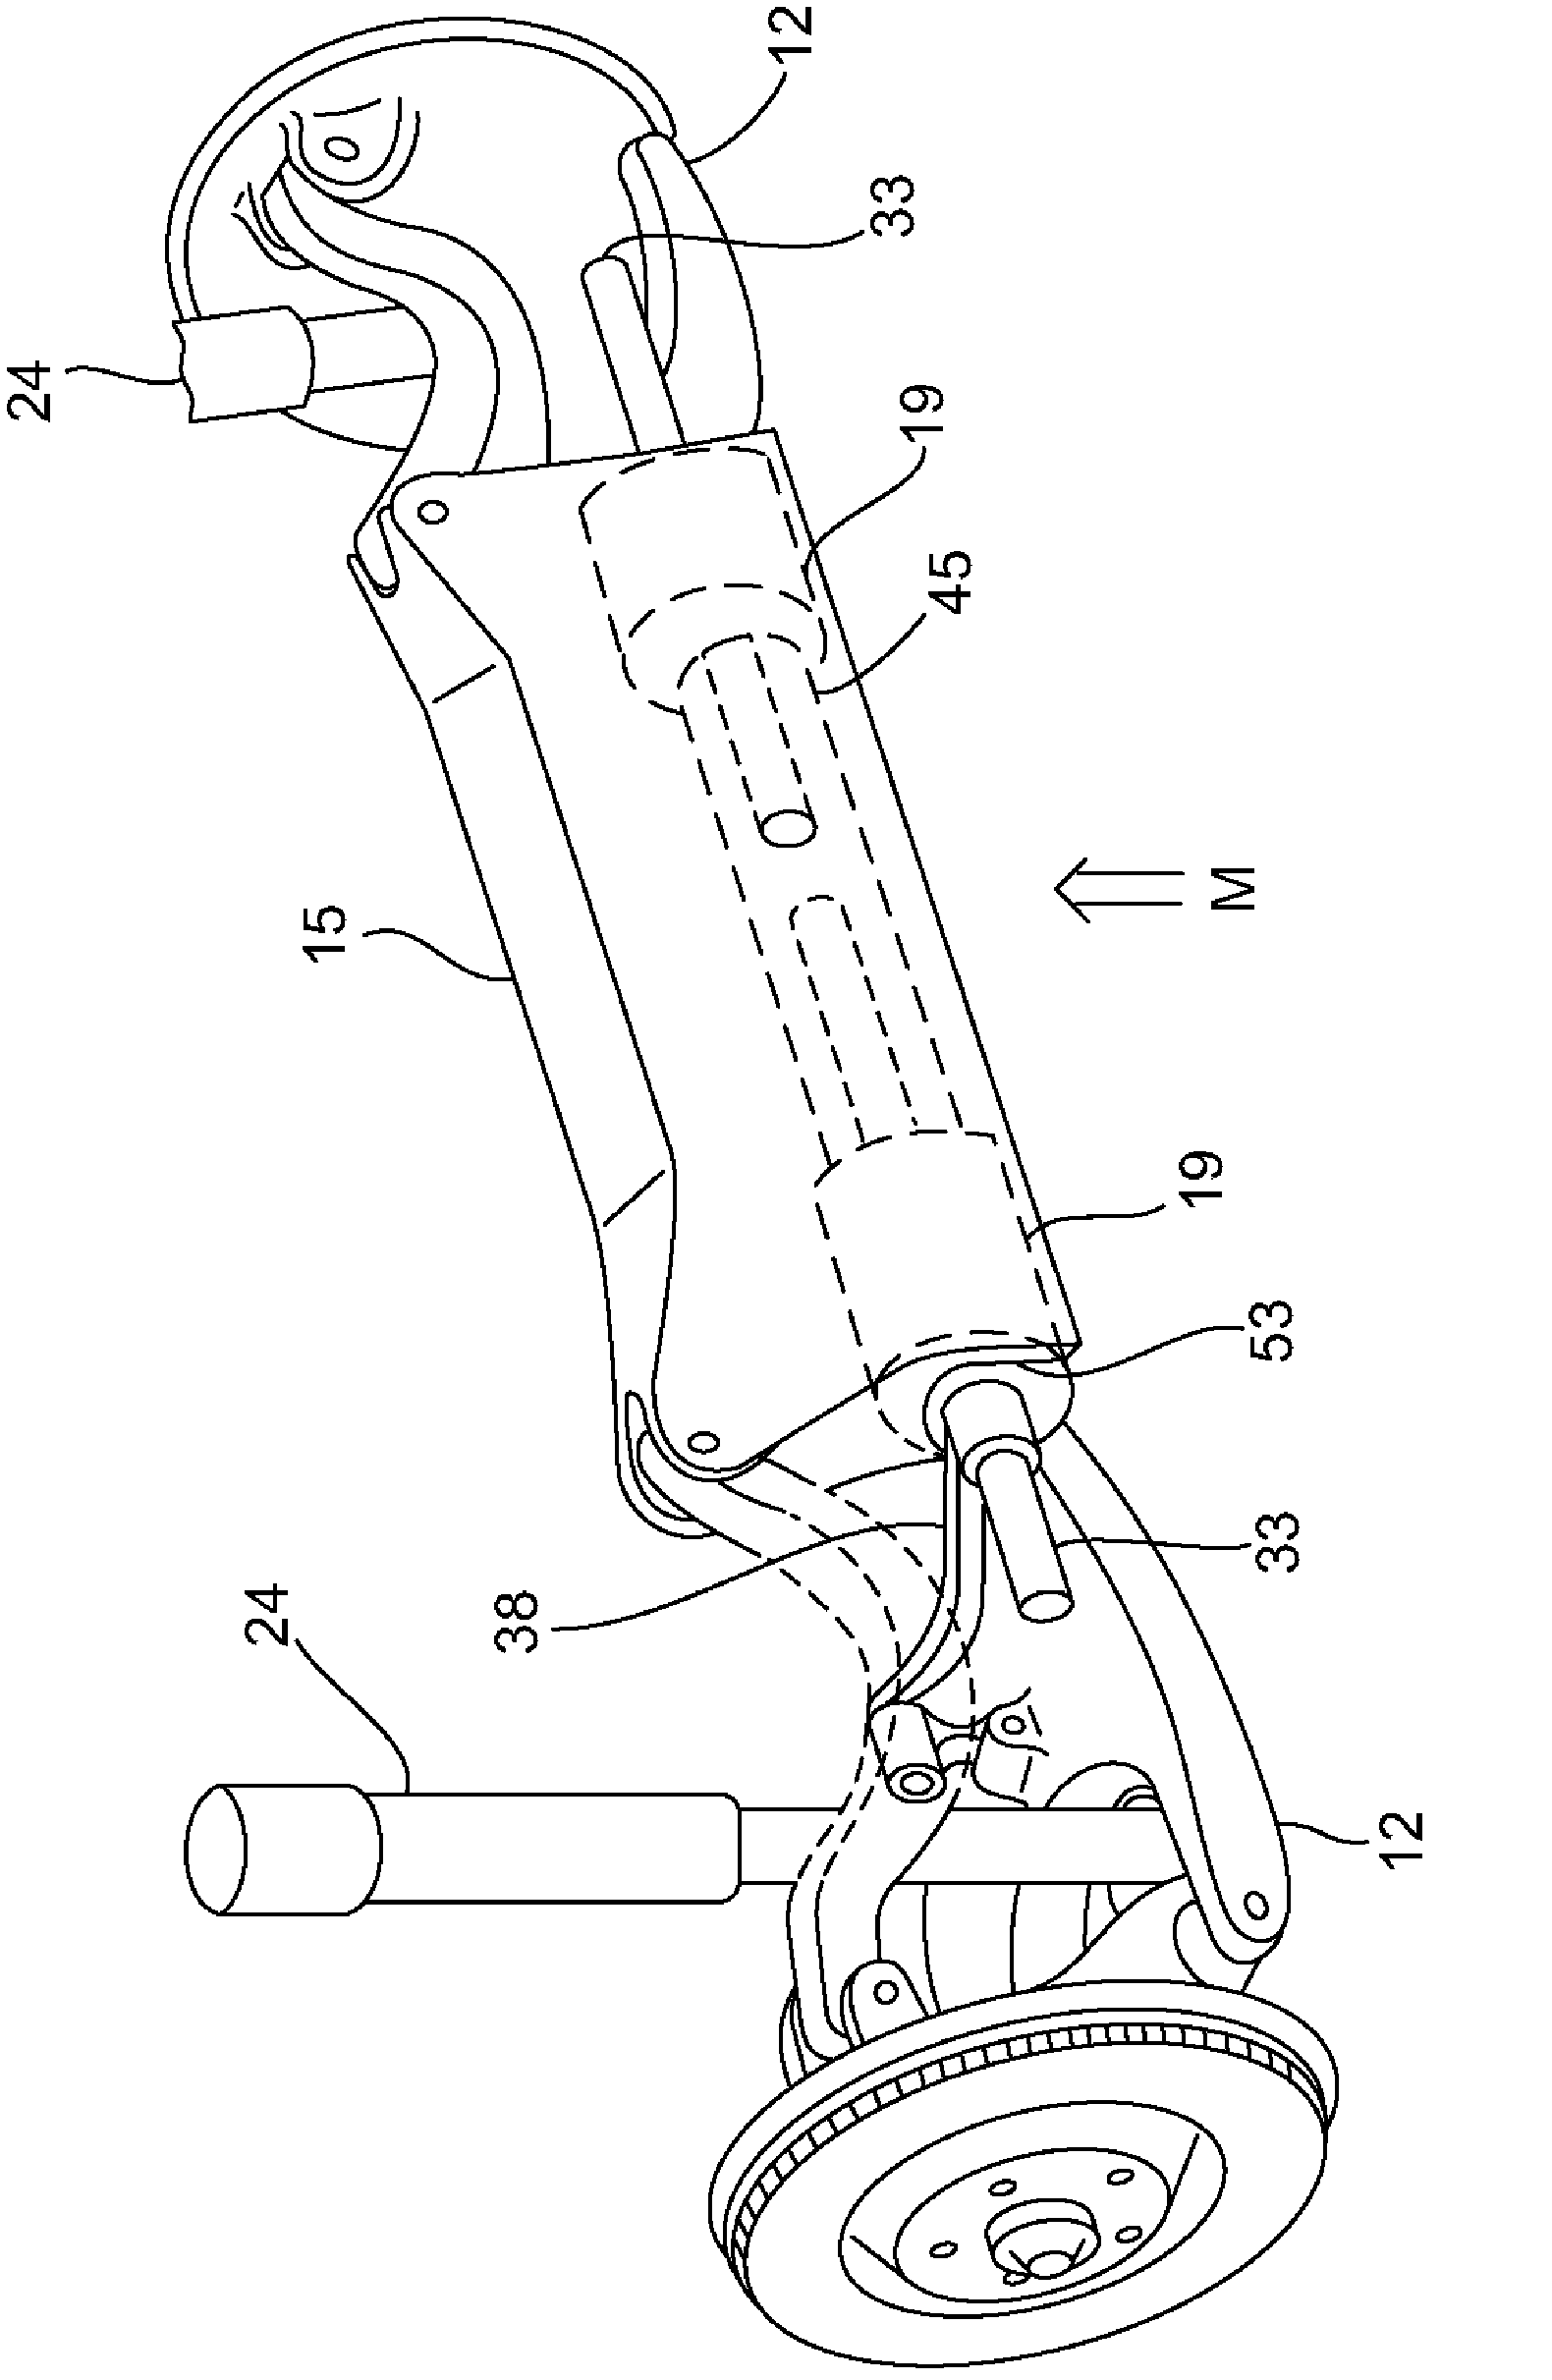 Spring structure for wheel suspensions in motor vehicles